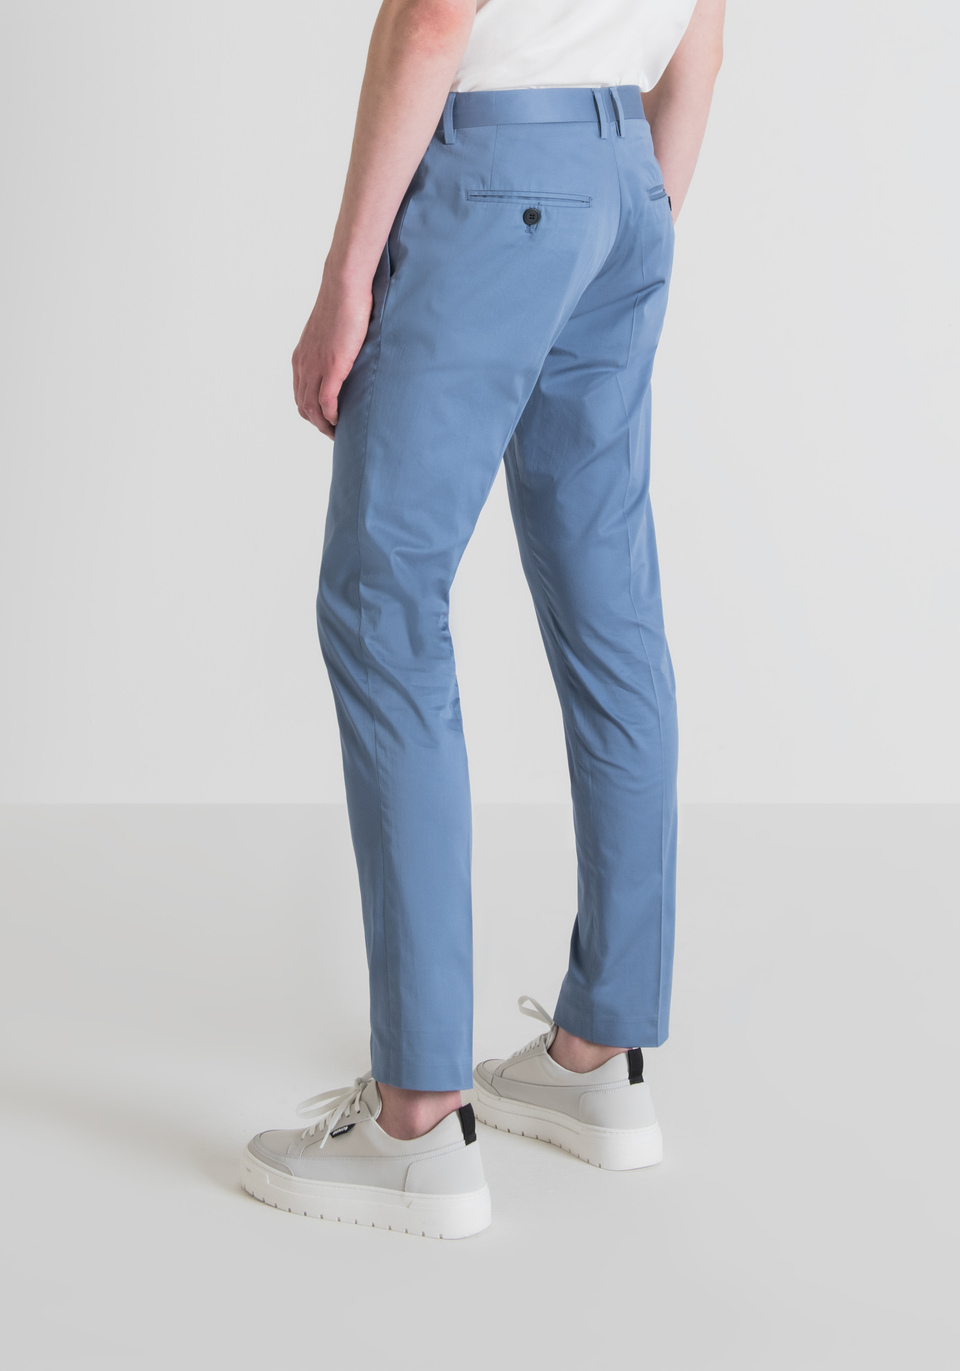 “BONNIE” SLIM-FIT TROUSERS IN LIGHTWEIGHT SATEEN-FINISH COTTON - Antony Morato Online Shop